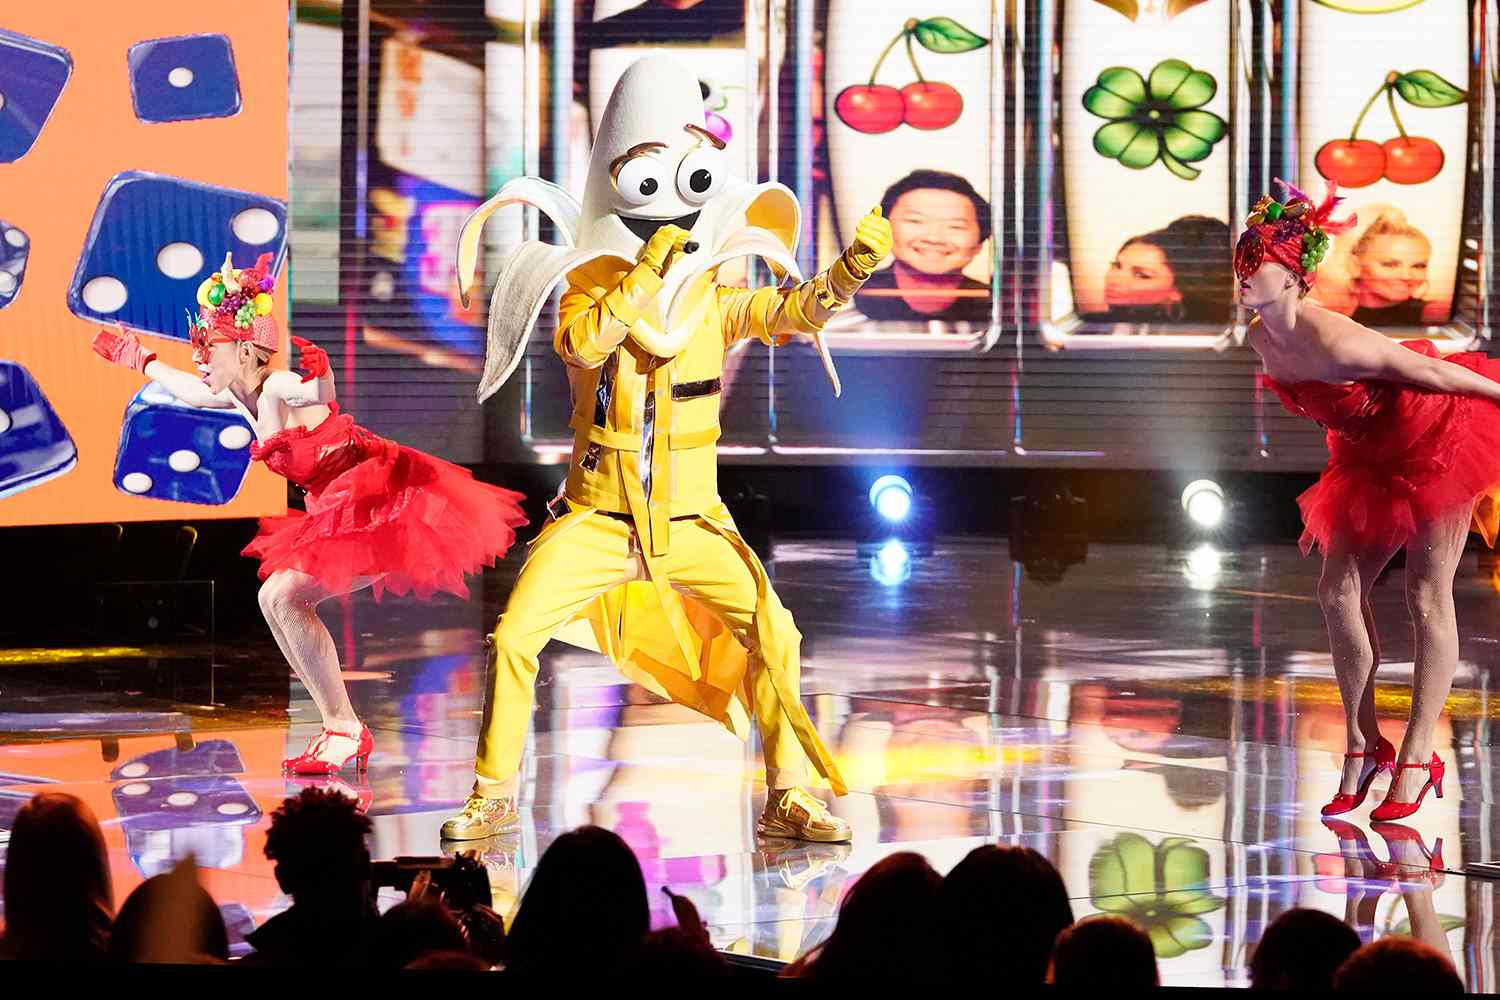 THE MASKED SINGER: The Banana in the &igrave;A Brand New Six Pack: Group B Kickoff!&icirc;